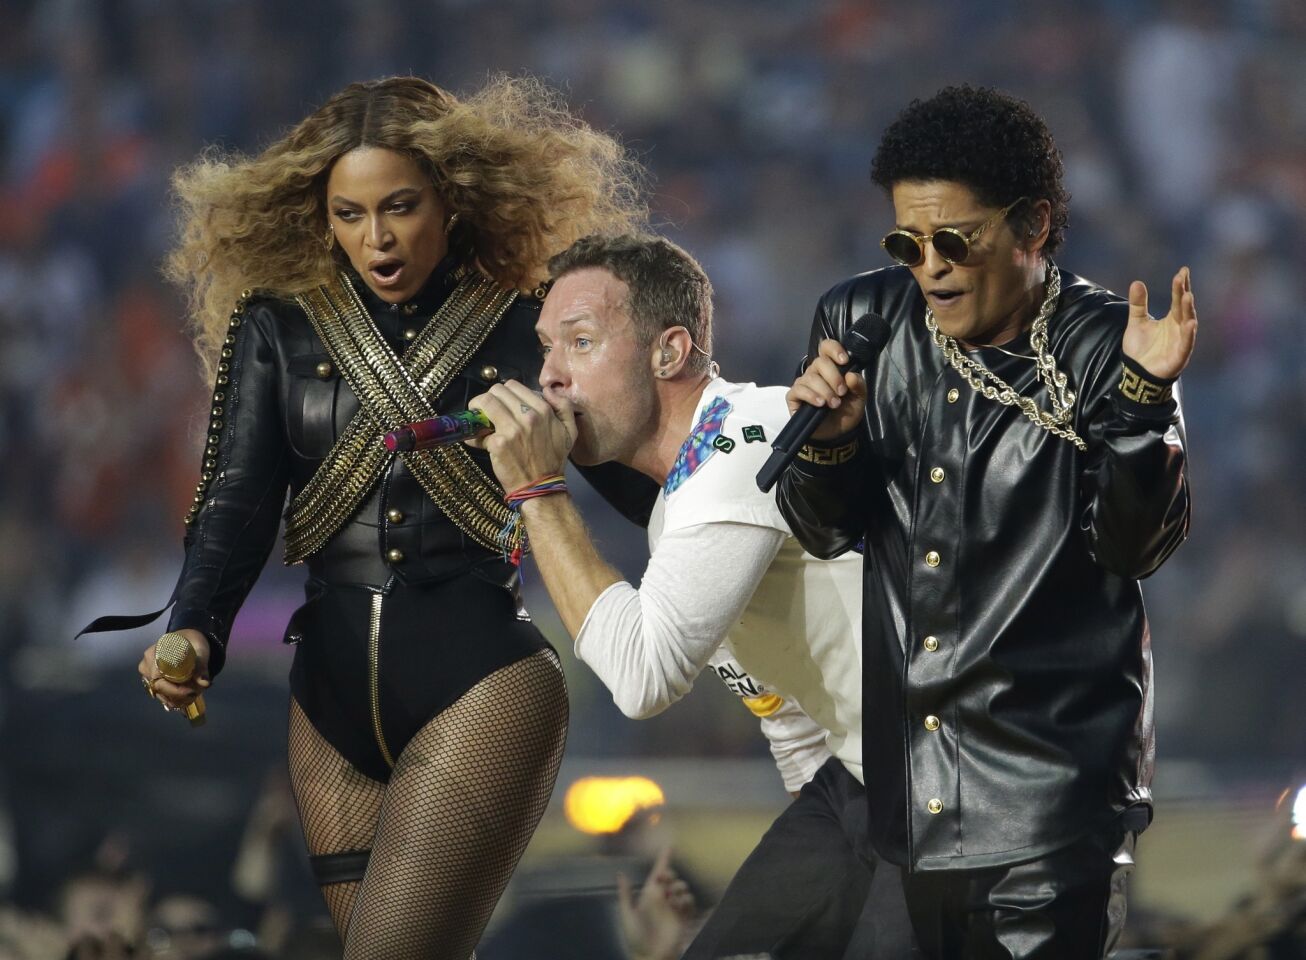 Beyonce, Coldplay singer Chris Martin, center, and Bruno Mars perform during halftime of Super Bowl 50.